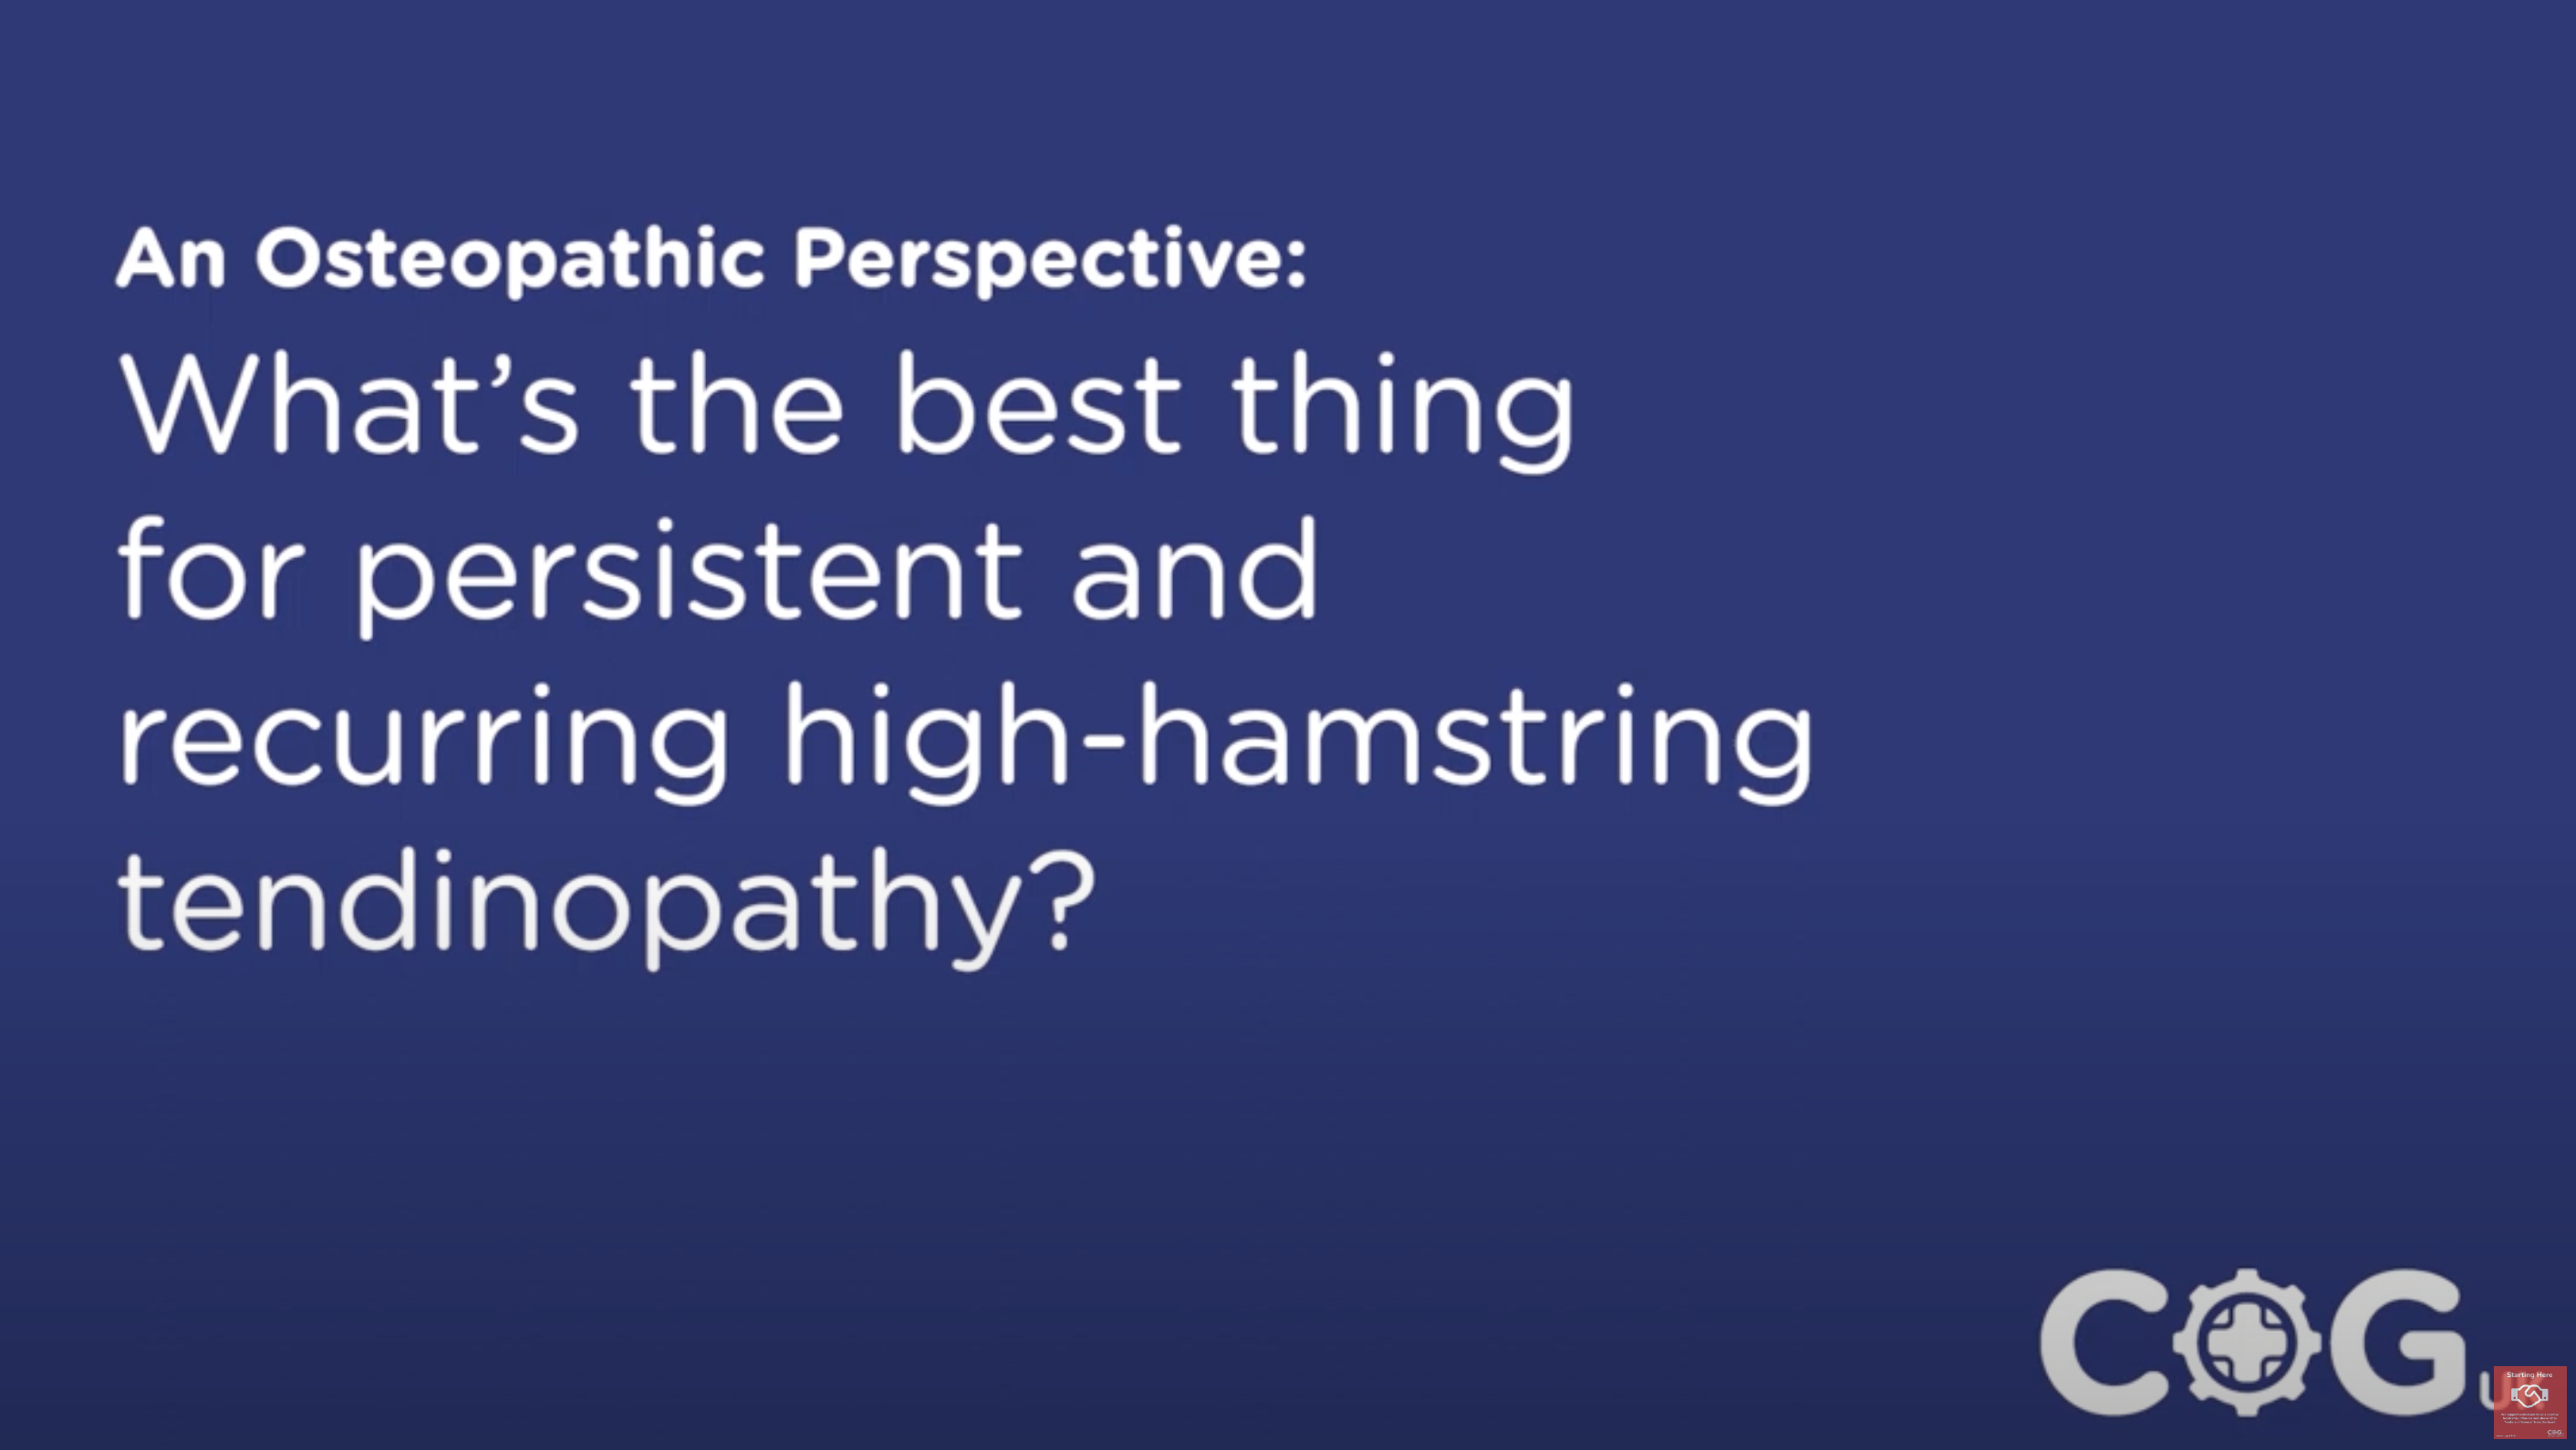 What Is The Best Way To Treat Persistent And Recurring High Hamstring Tendinopathy?